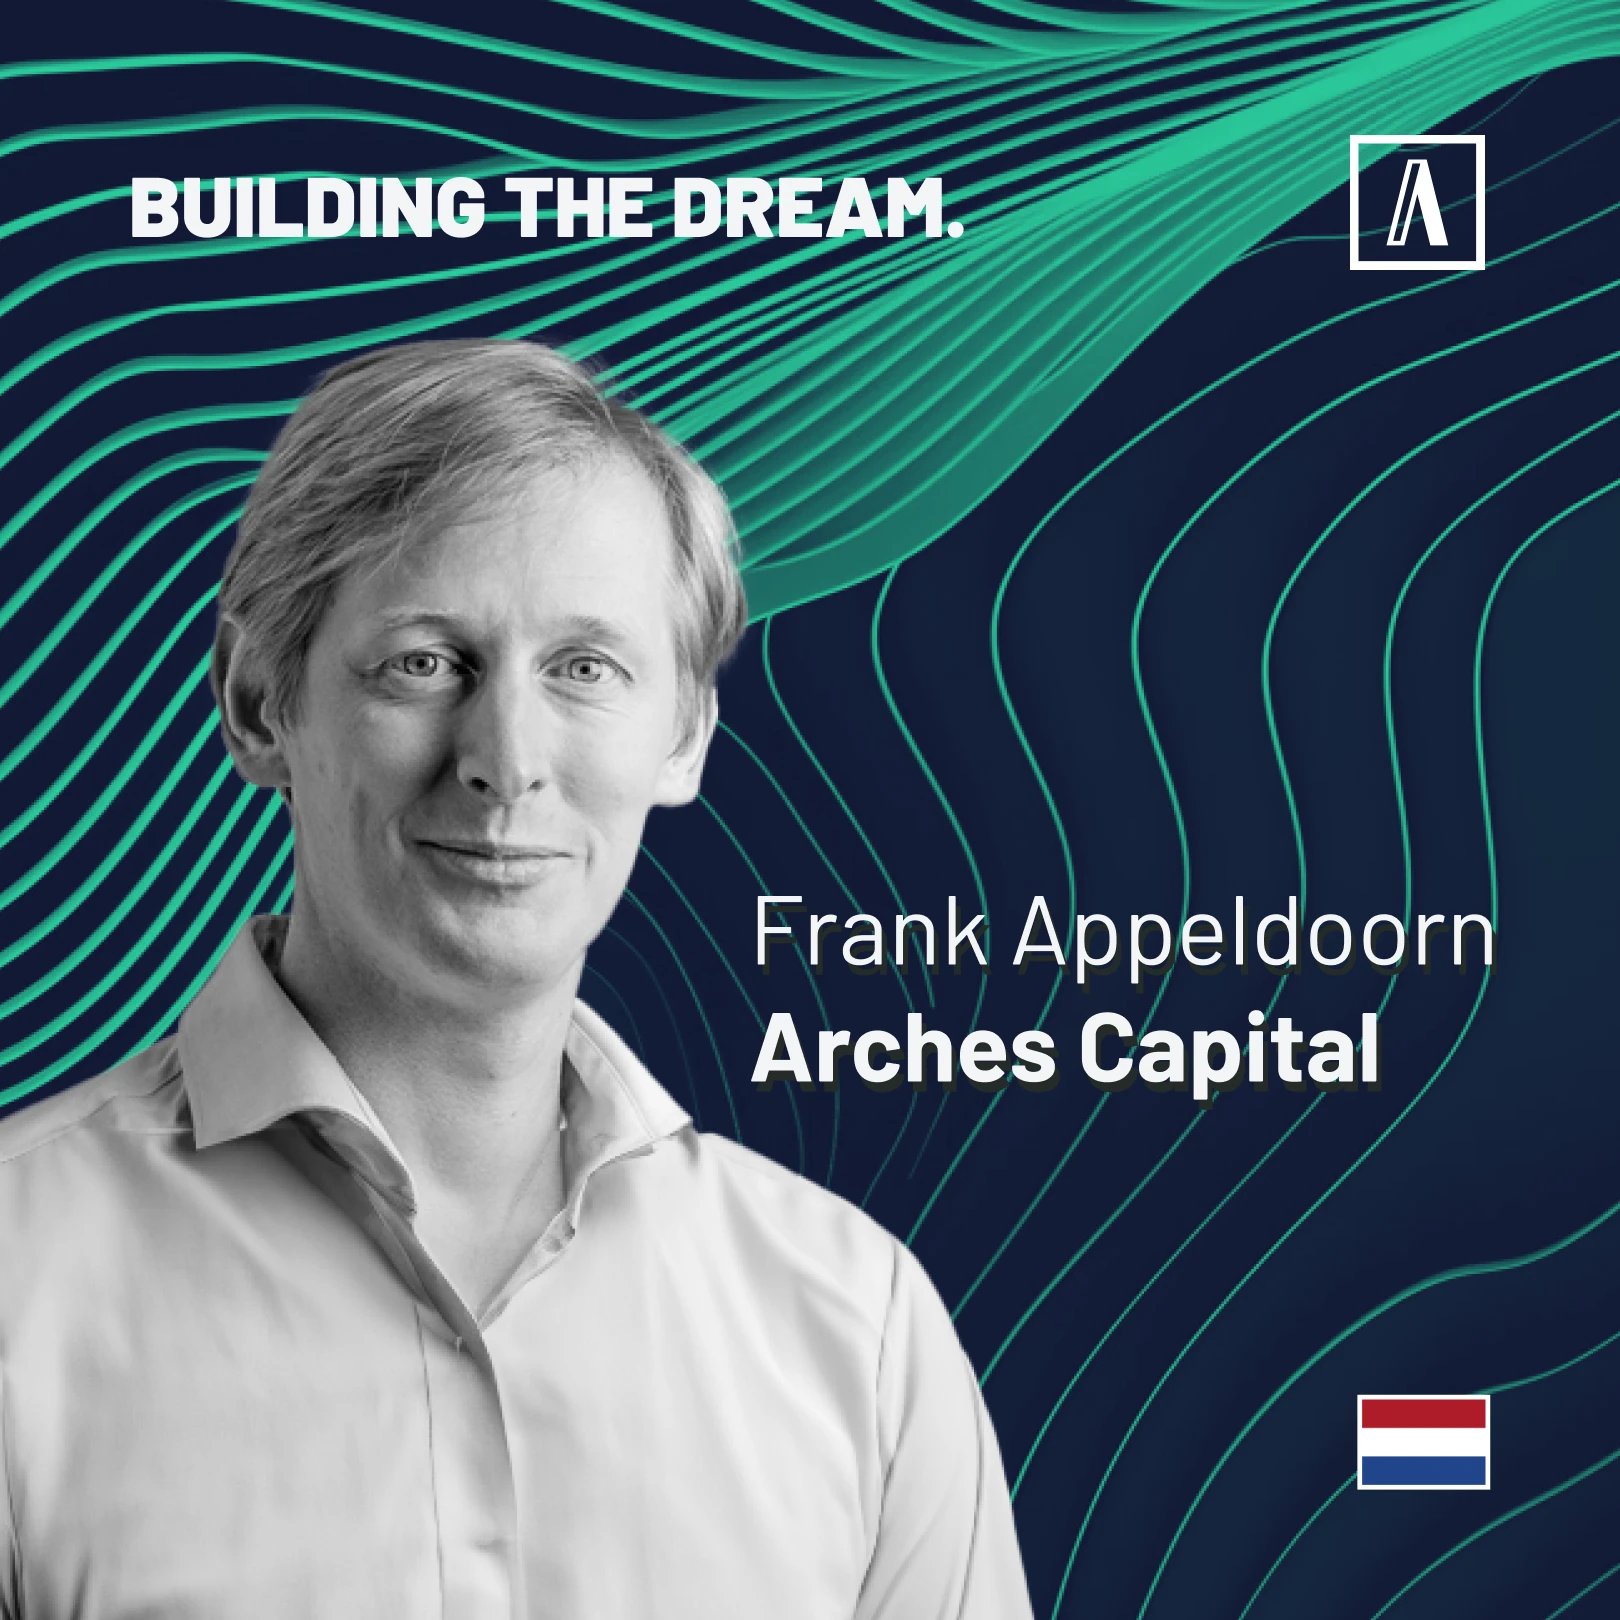 Frank Appeldoorn - Arches Capital